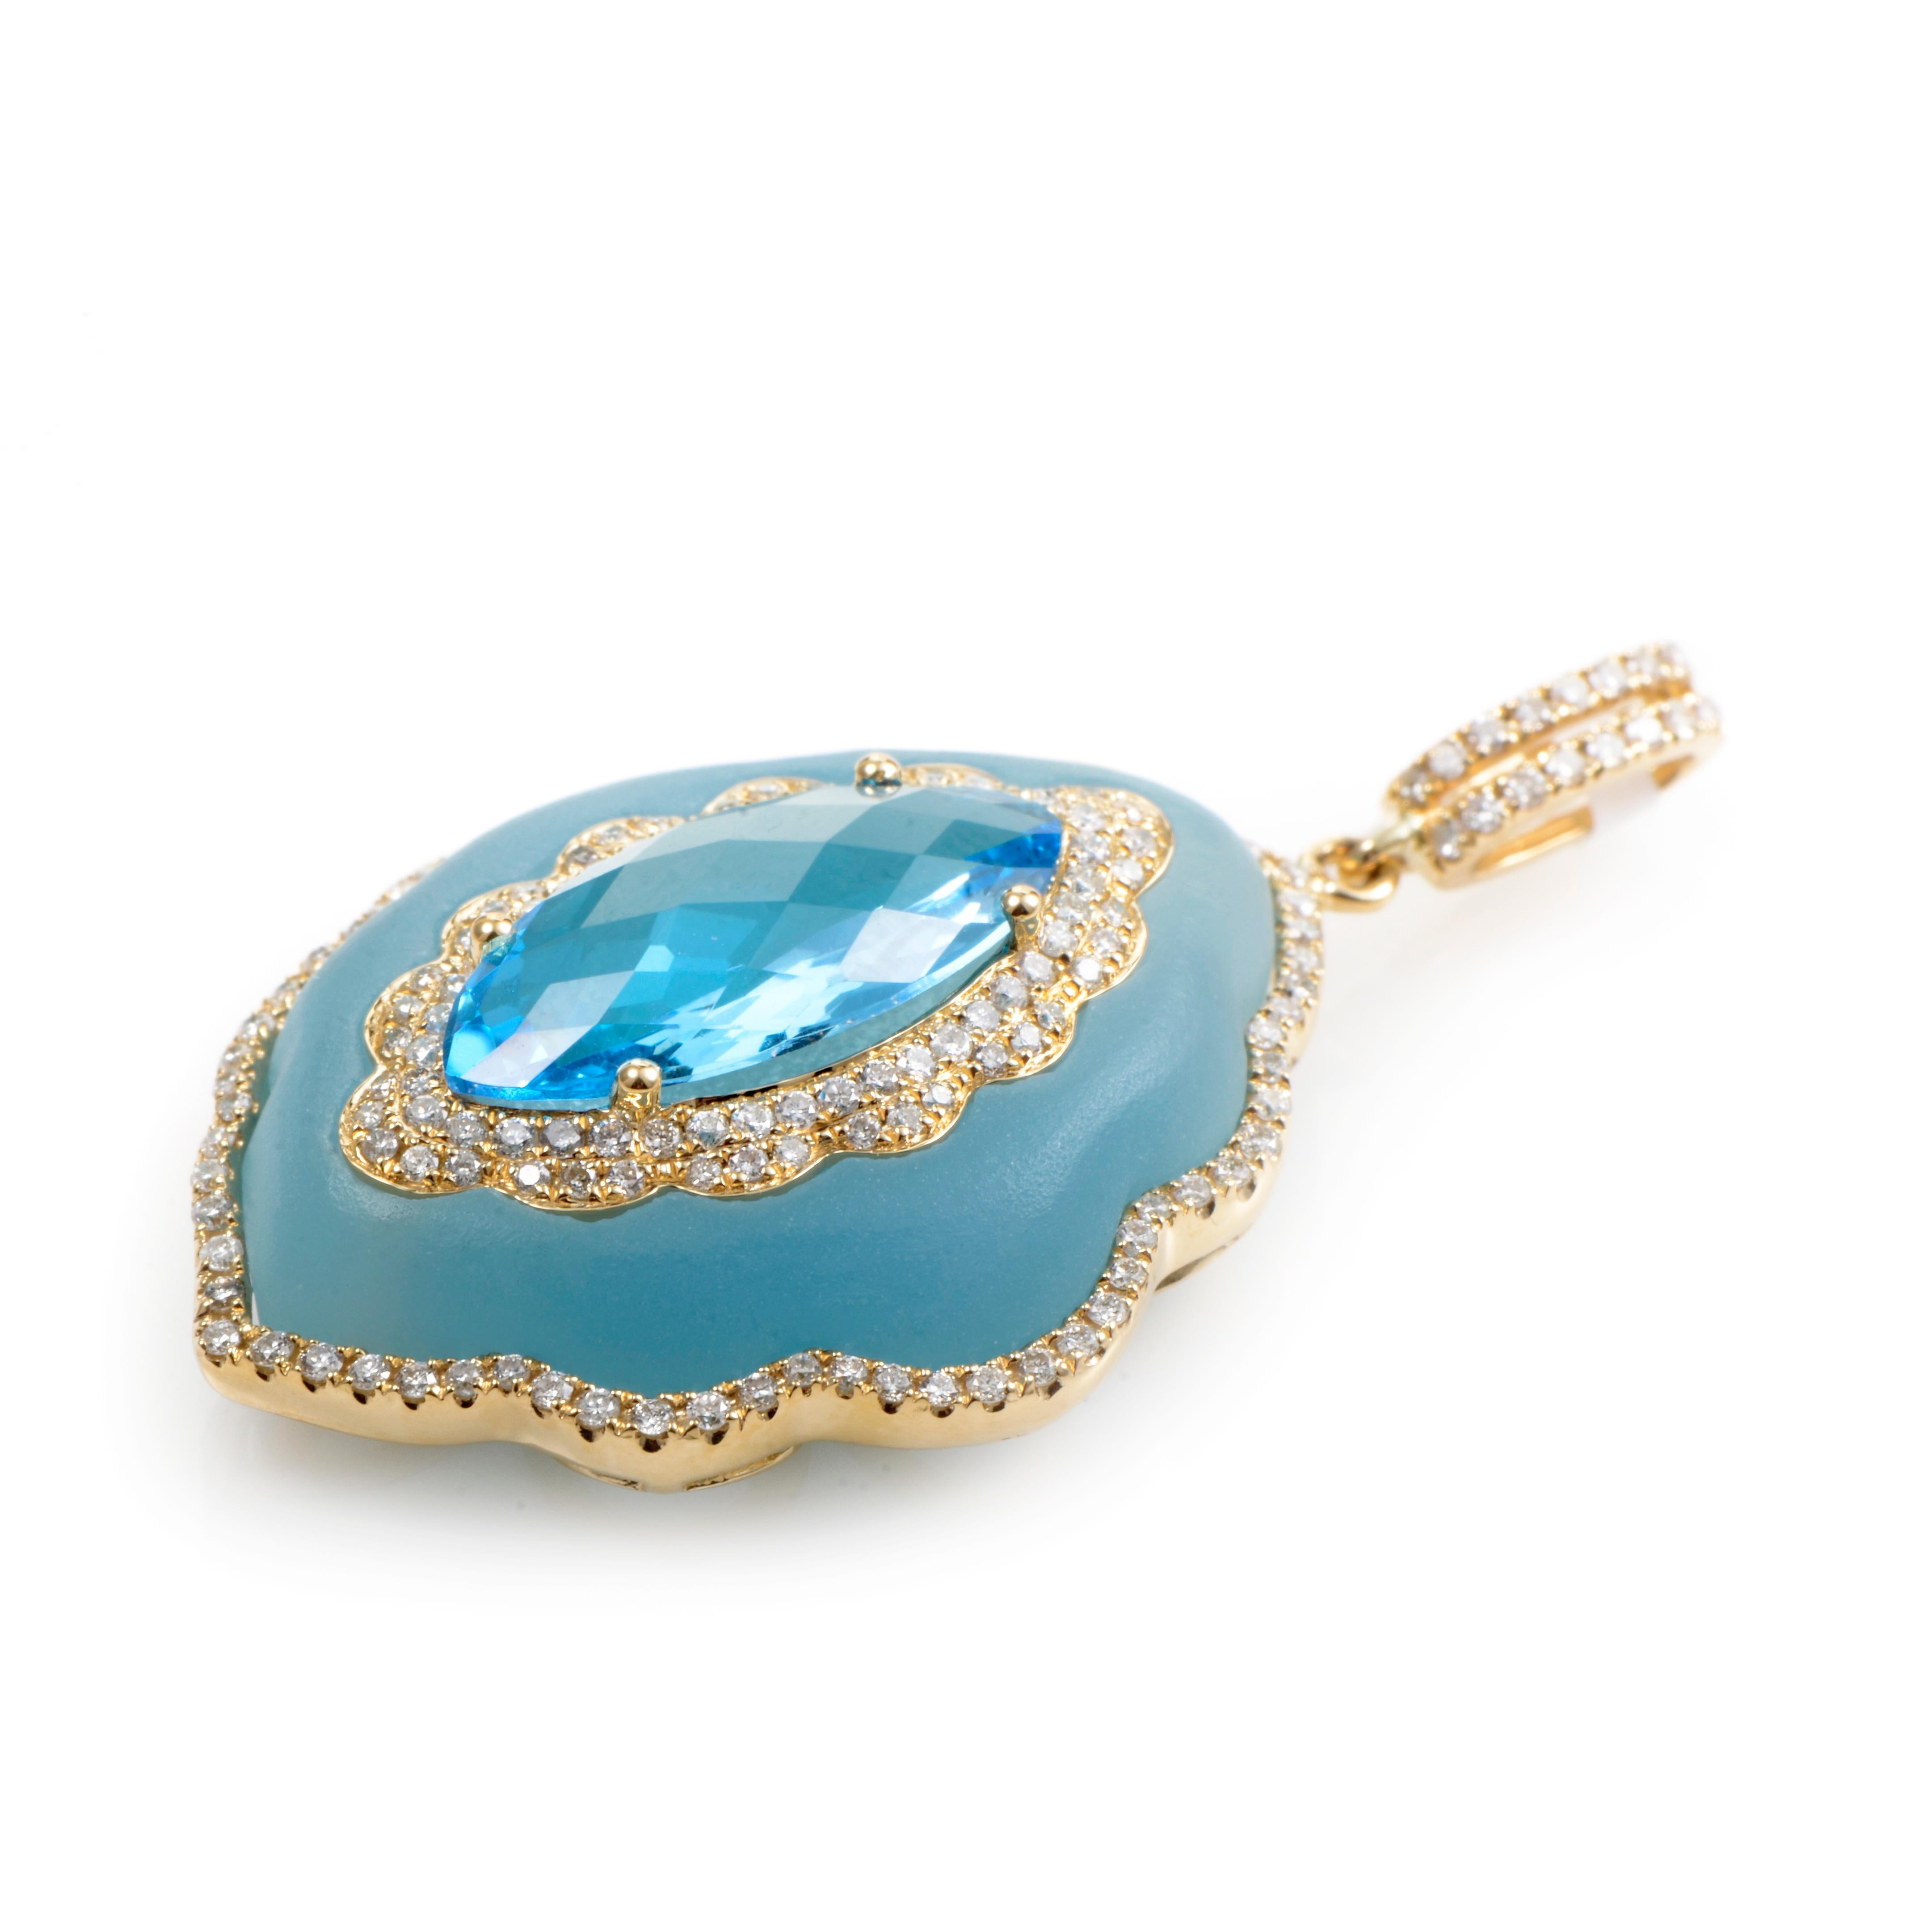 This whimsical pendant shines with a dreamy, blue glow. The pendant is made of 18K yellow gold and is set with ~30.88ct of blue quartz. Lastly, a faceted topaz stone is set in the center of the quartz. Both stones are accented with white diamonds